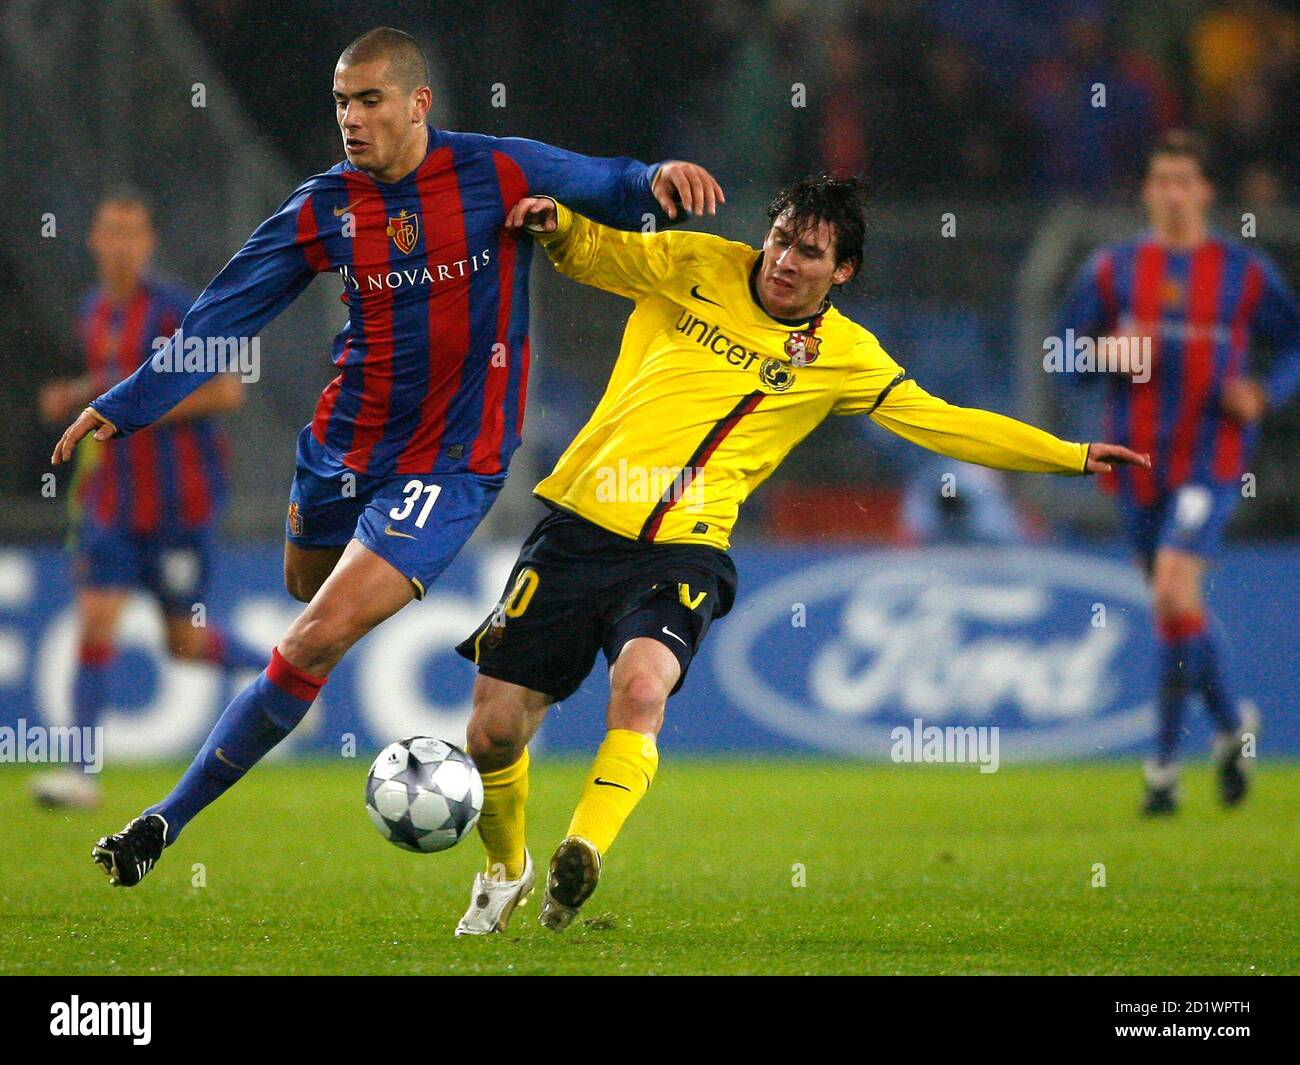 FC Basel's Eren Derdiyok (L) challenges Lionel Messi of Barcelona during  their Champions League soccer match in Basel October 22, 2008.  REUTERS/Christian Hartmann (SWITZERLAND Stock Photo - Alamy